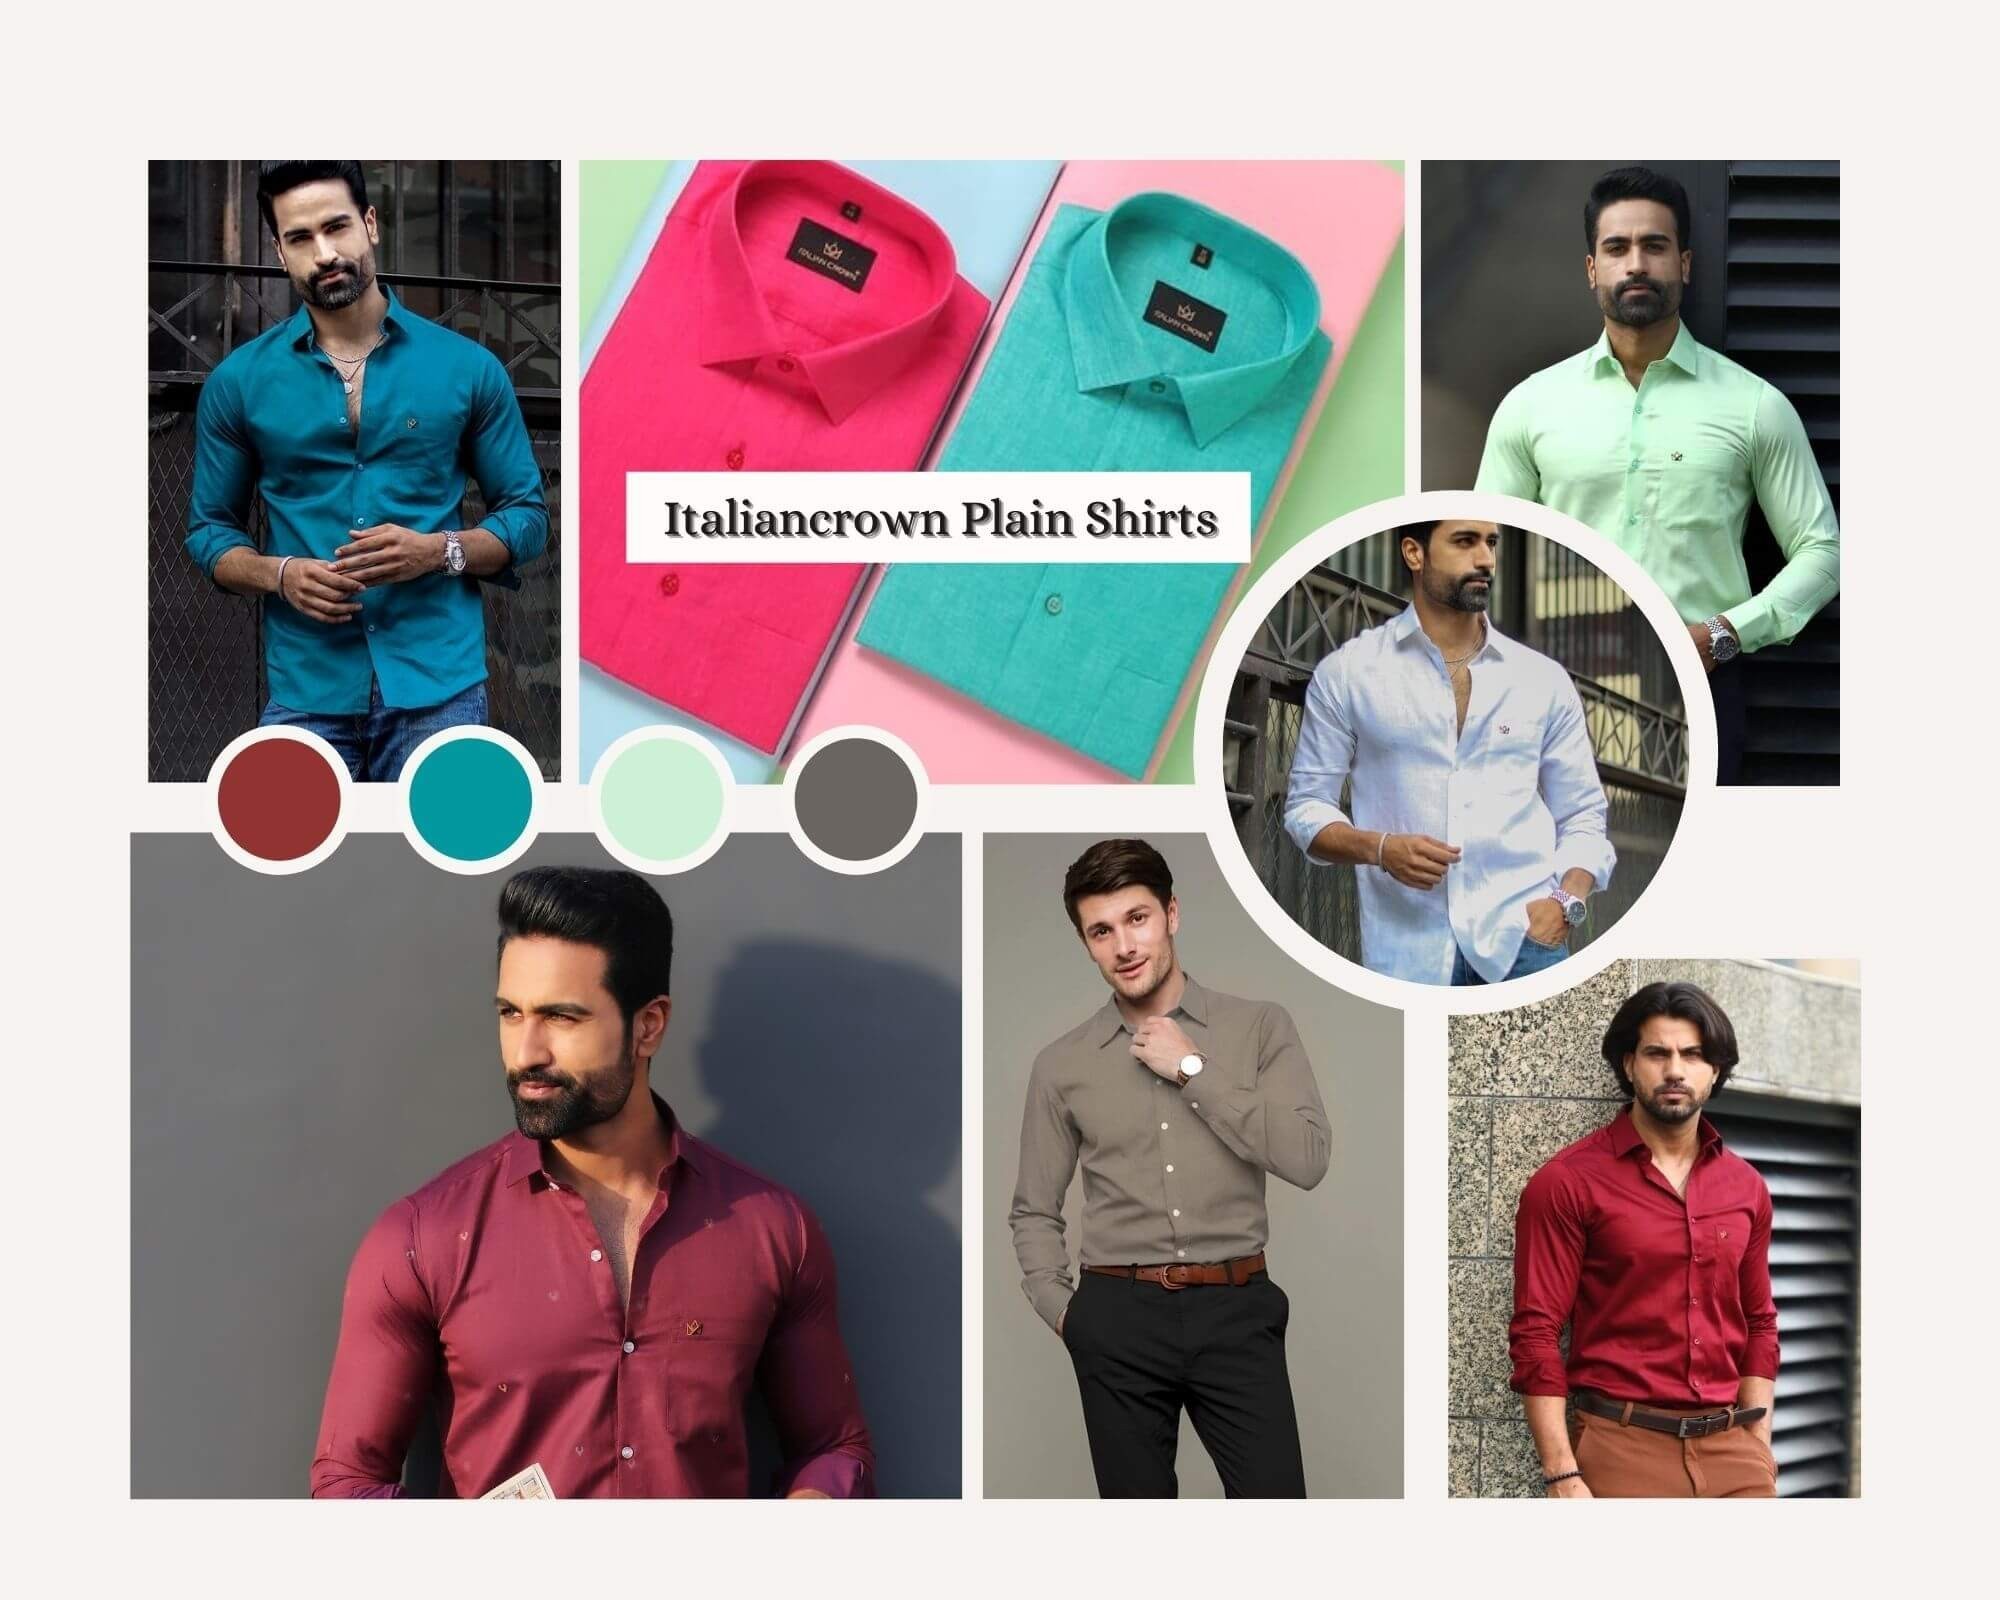 Buy Mens Plain Shirts Online at Low Prices  Italiancrown 